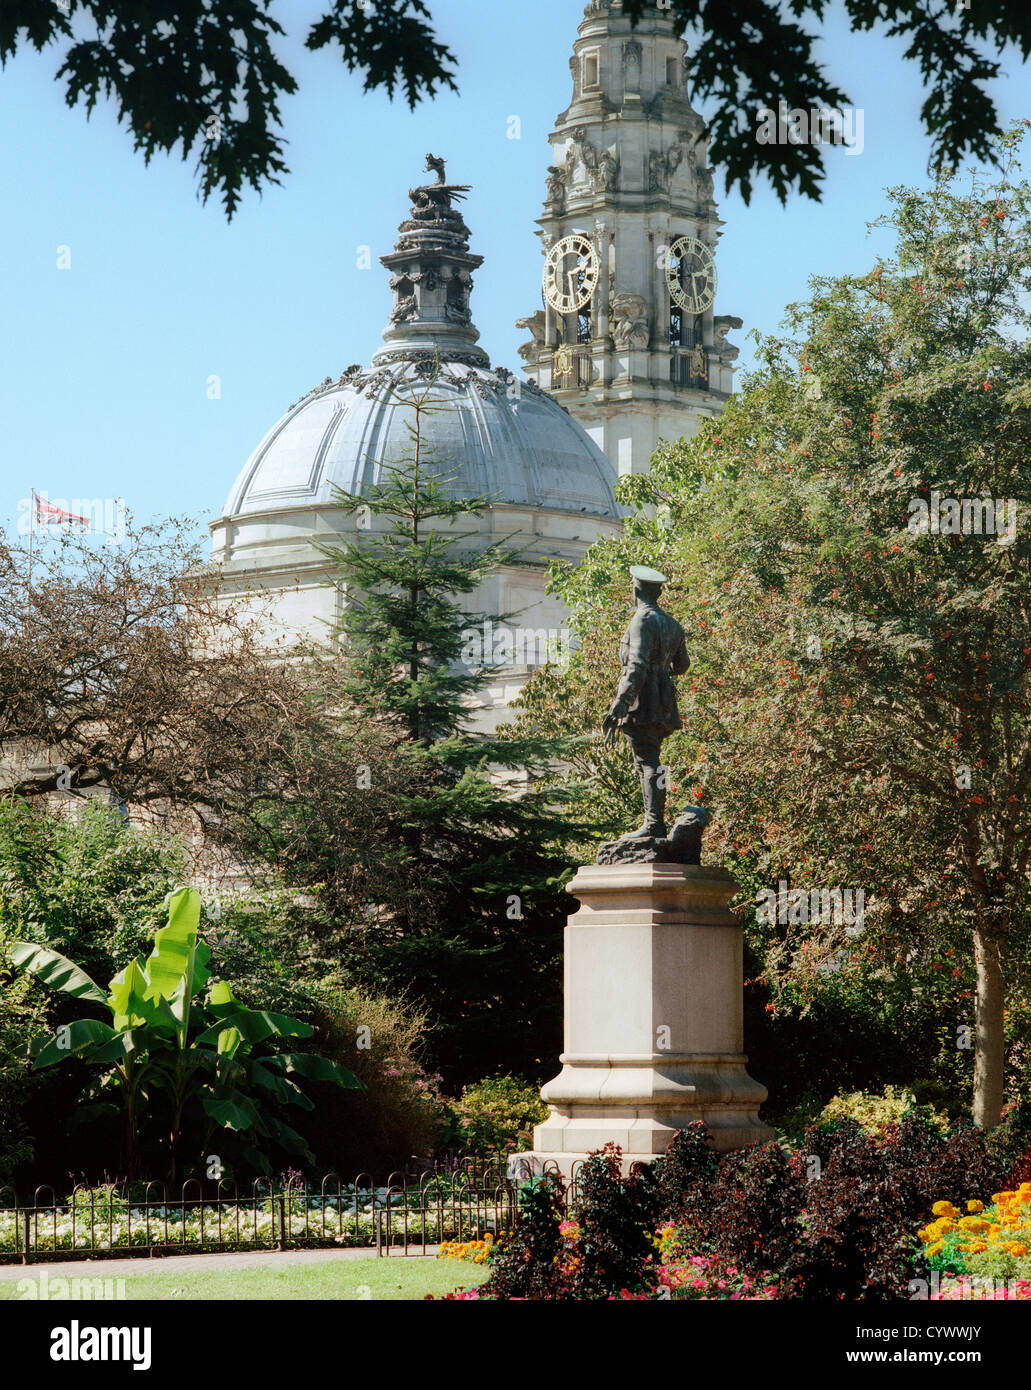 Gorsedd Gardens, Cathays Park, Cardiff, with statue of Lord Ninian and the dome and clock tower of the city hall Stock Photo